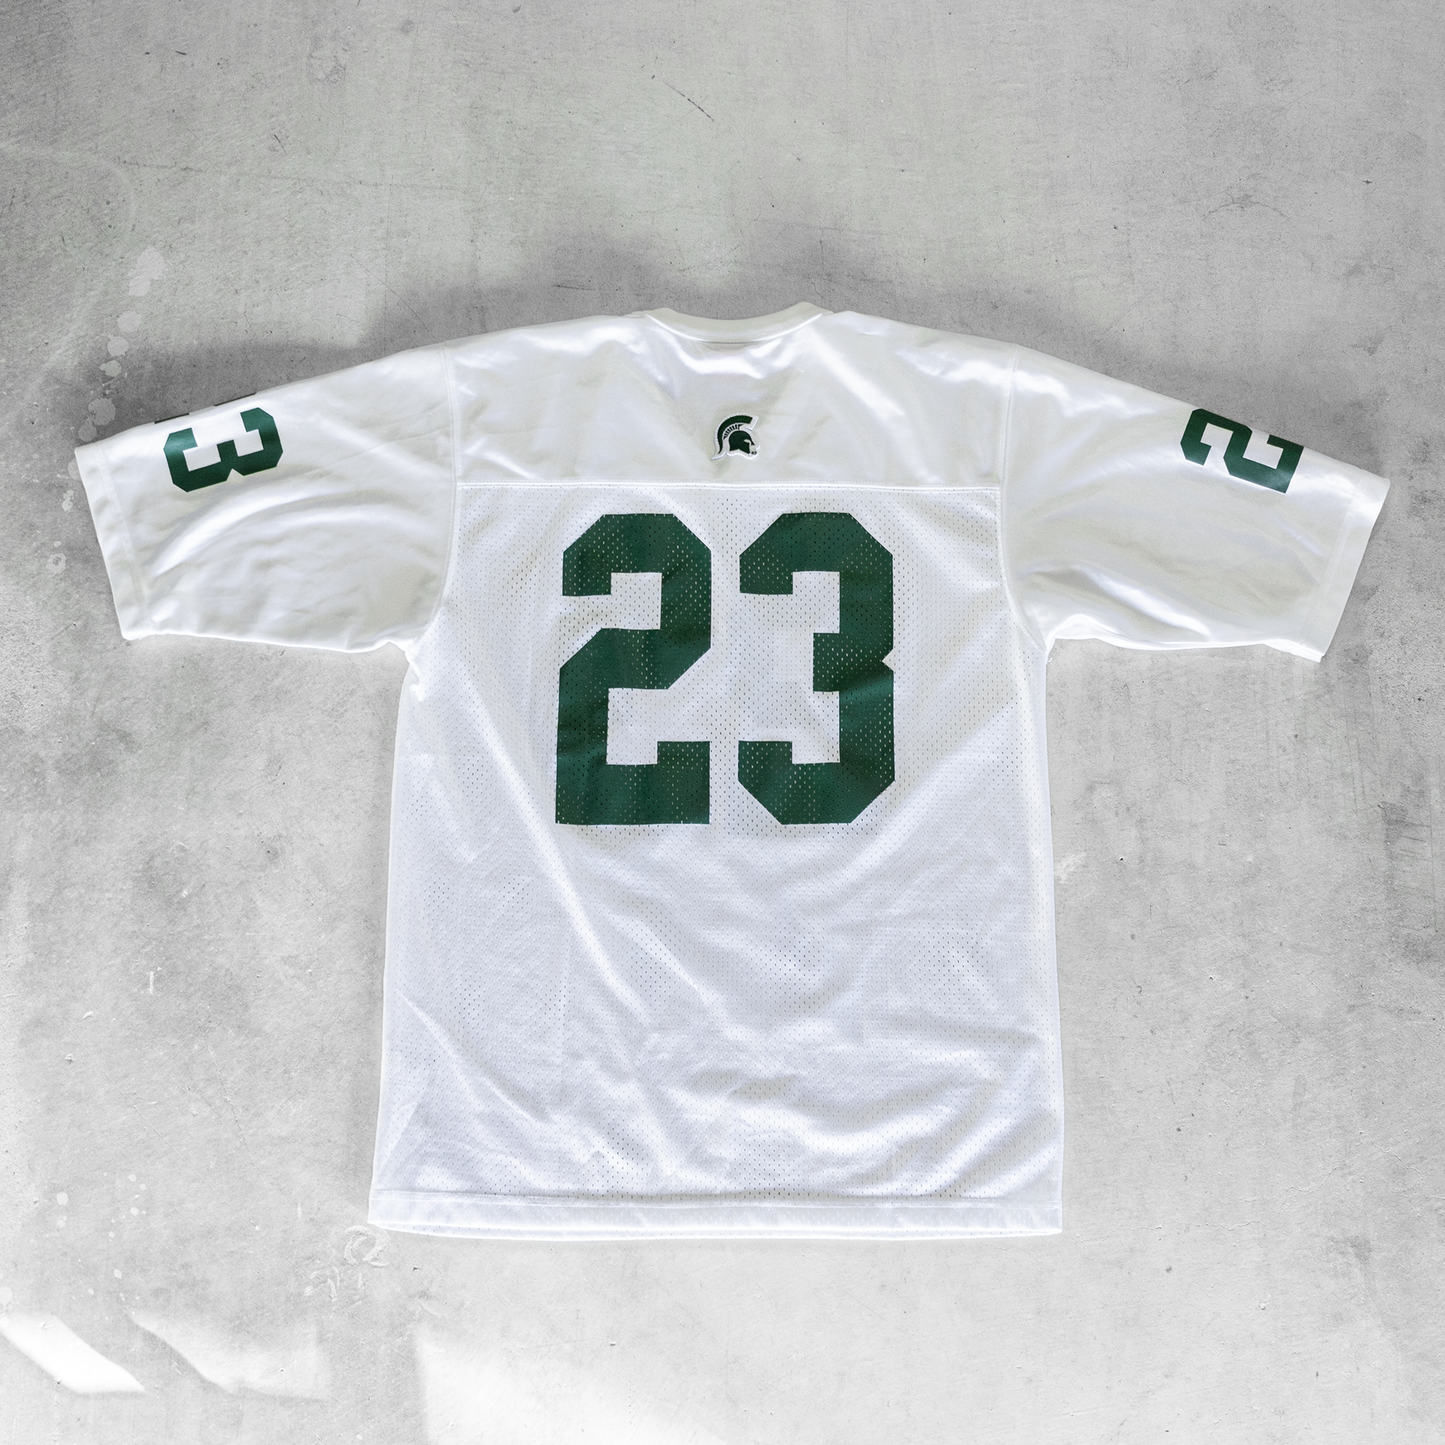 Vintage Michigan State Spartans #23 Football Jersey (M)